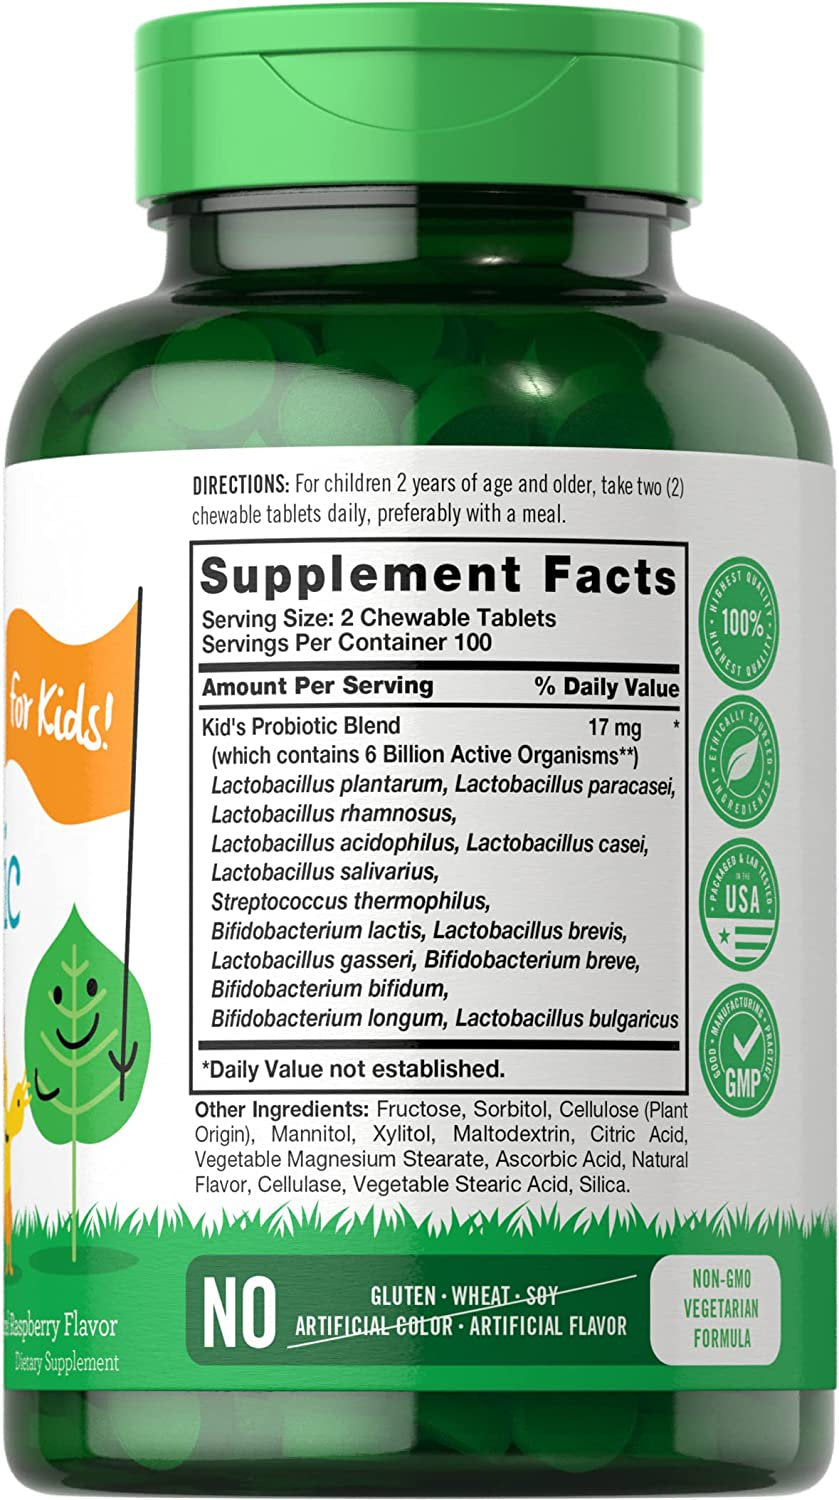 Chewable Probiotics for Kids | 200 Tablets | Natural Raspberry Flavor | by Lil' Sprouts